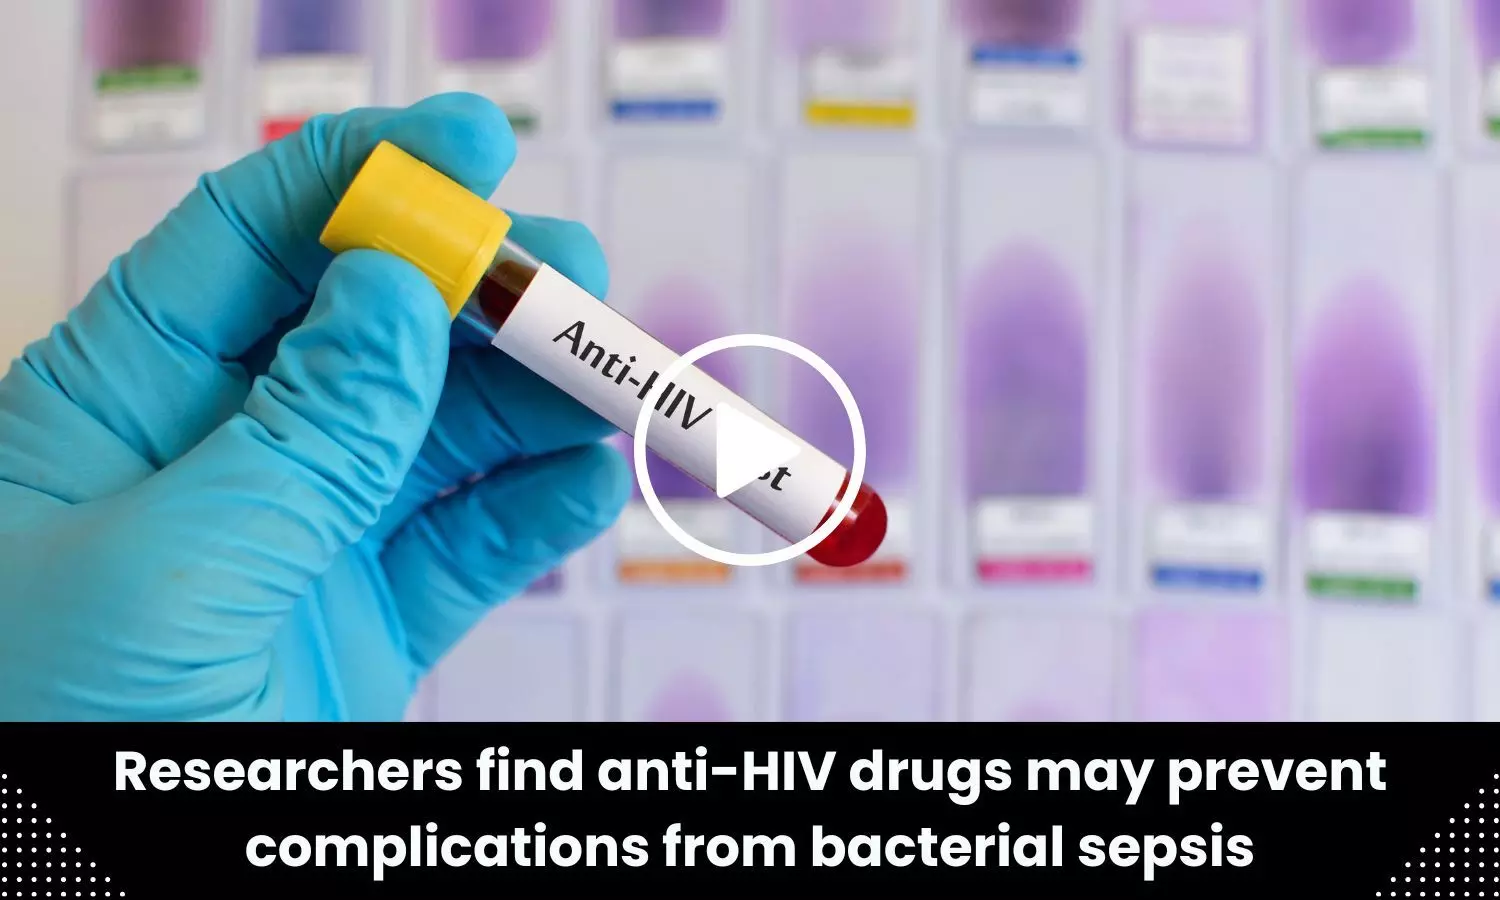 Anti-HIV drugs may prevent complications from bacterial sepsis says study